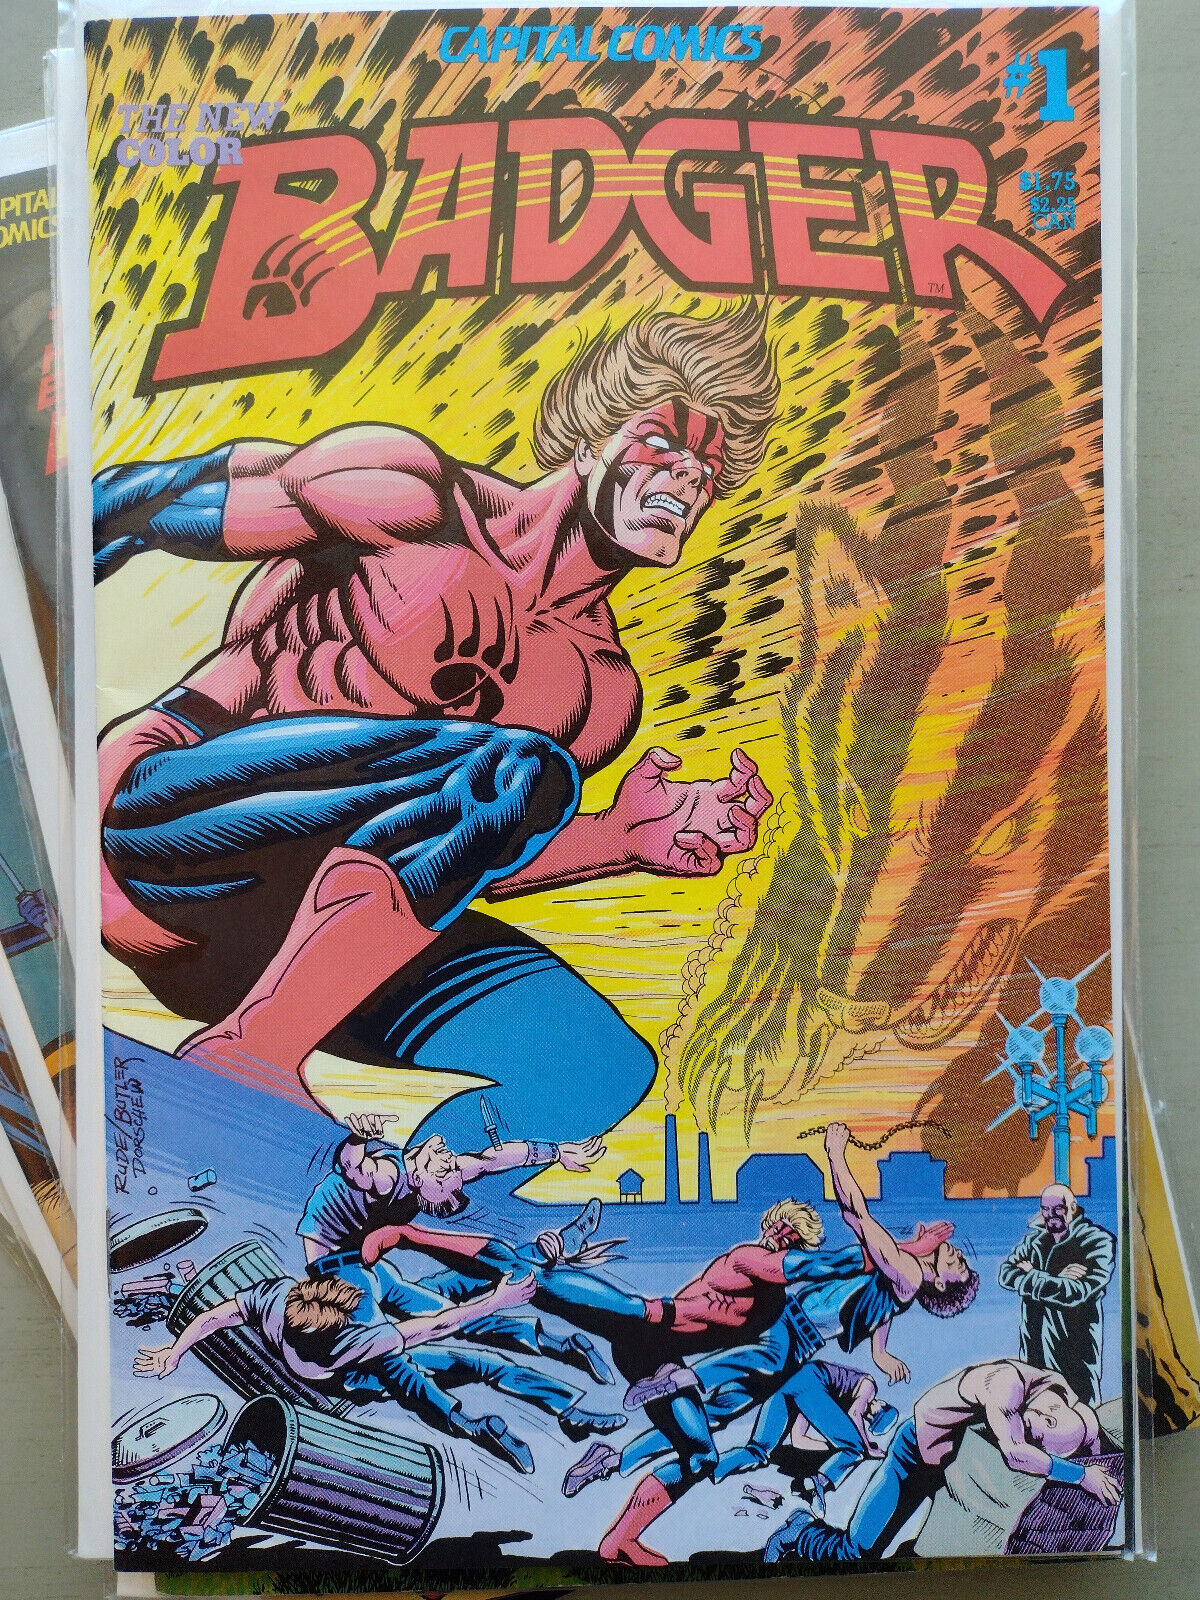 Badger (1983) #1-9 complete, Mike Baron, Capital/First, FN